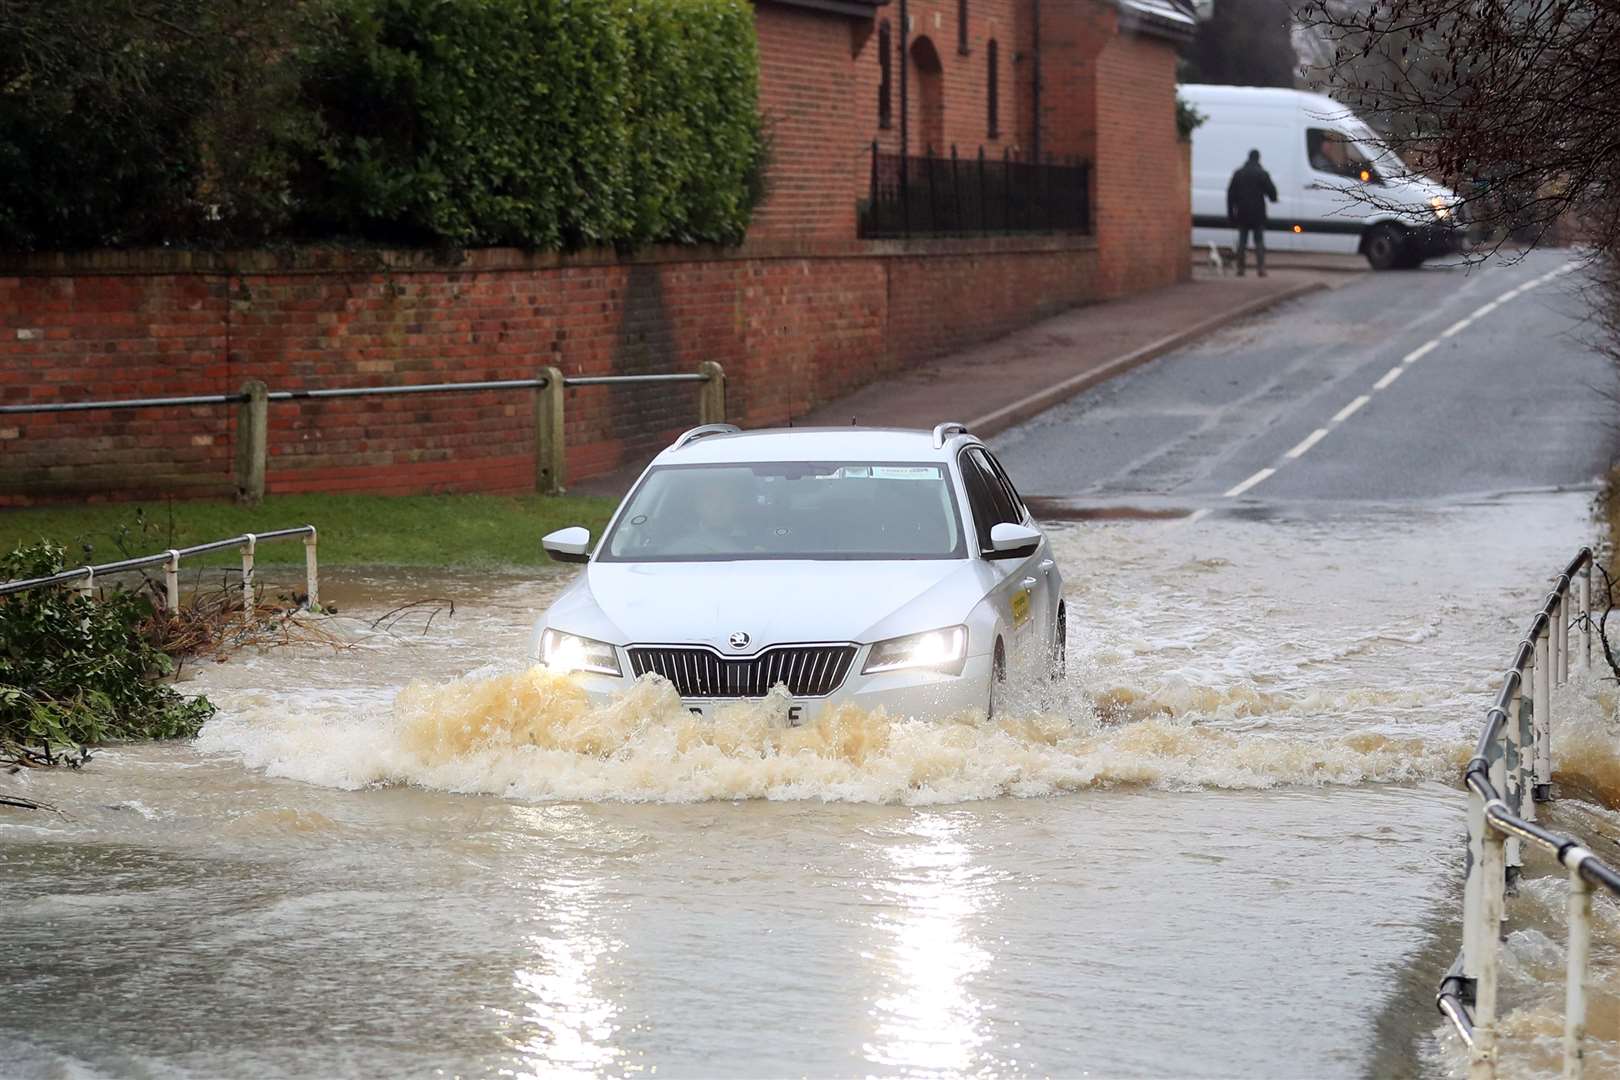 A car on a flooded road in Bottesford, Leicestershire (Mike Egerton/PA)